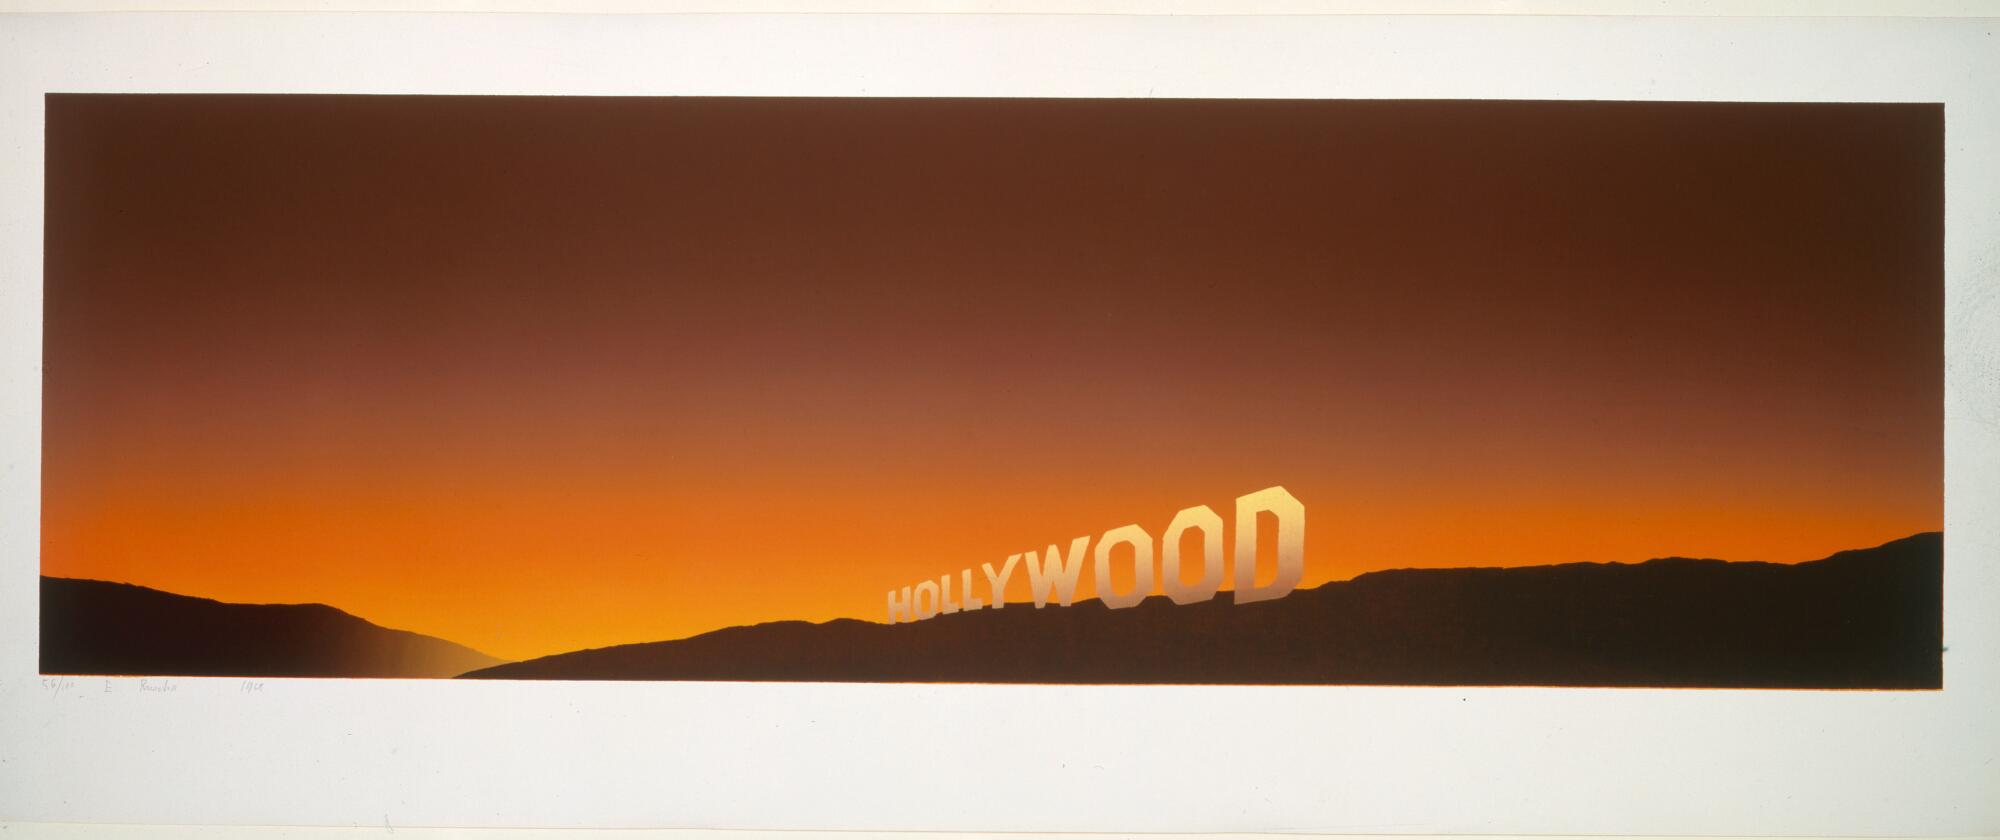 Hollywood sign Ed Ruscha, Hollywood, 1968, Los Angeles County Museum of Art, Museum Acquisition Fund, © Ed Ruscha, photo